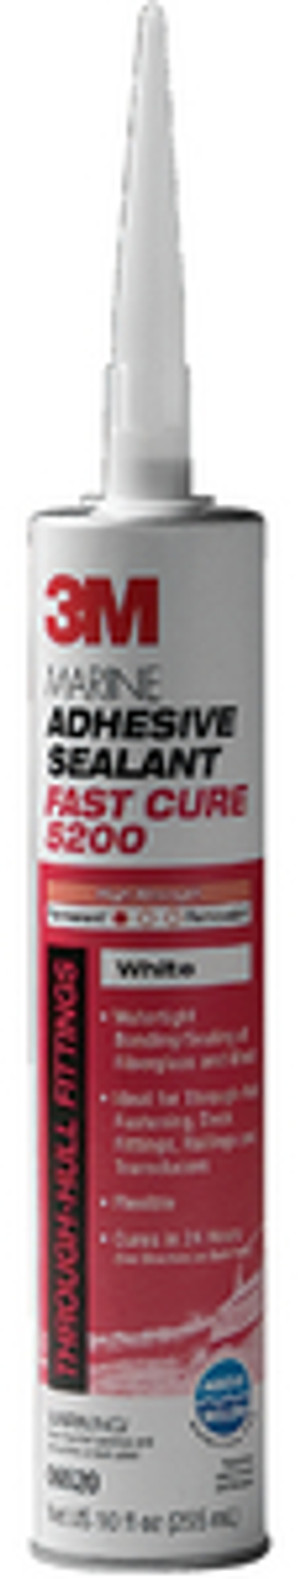 3M 06520 5200 FAST CURE WHITE - CART.